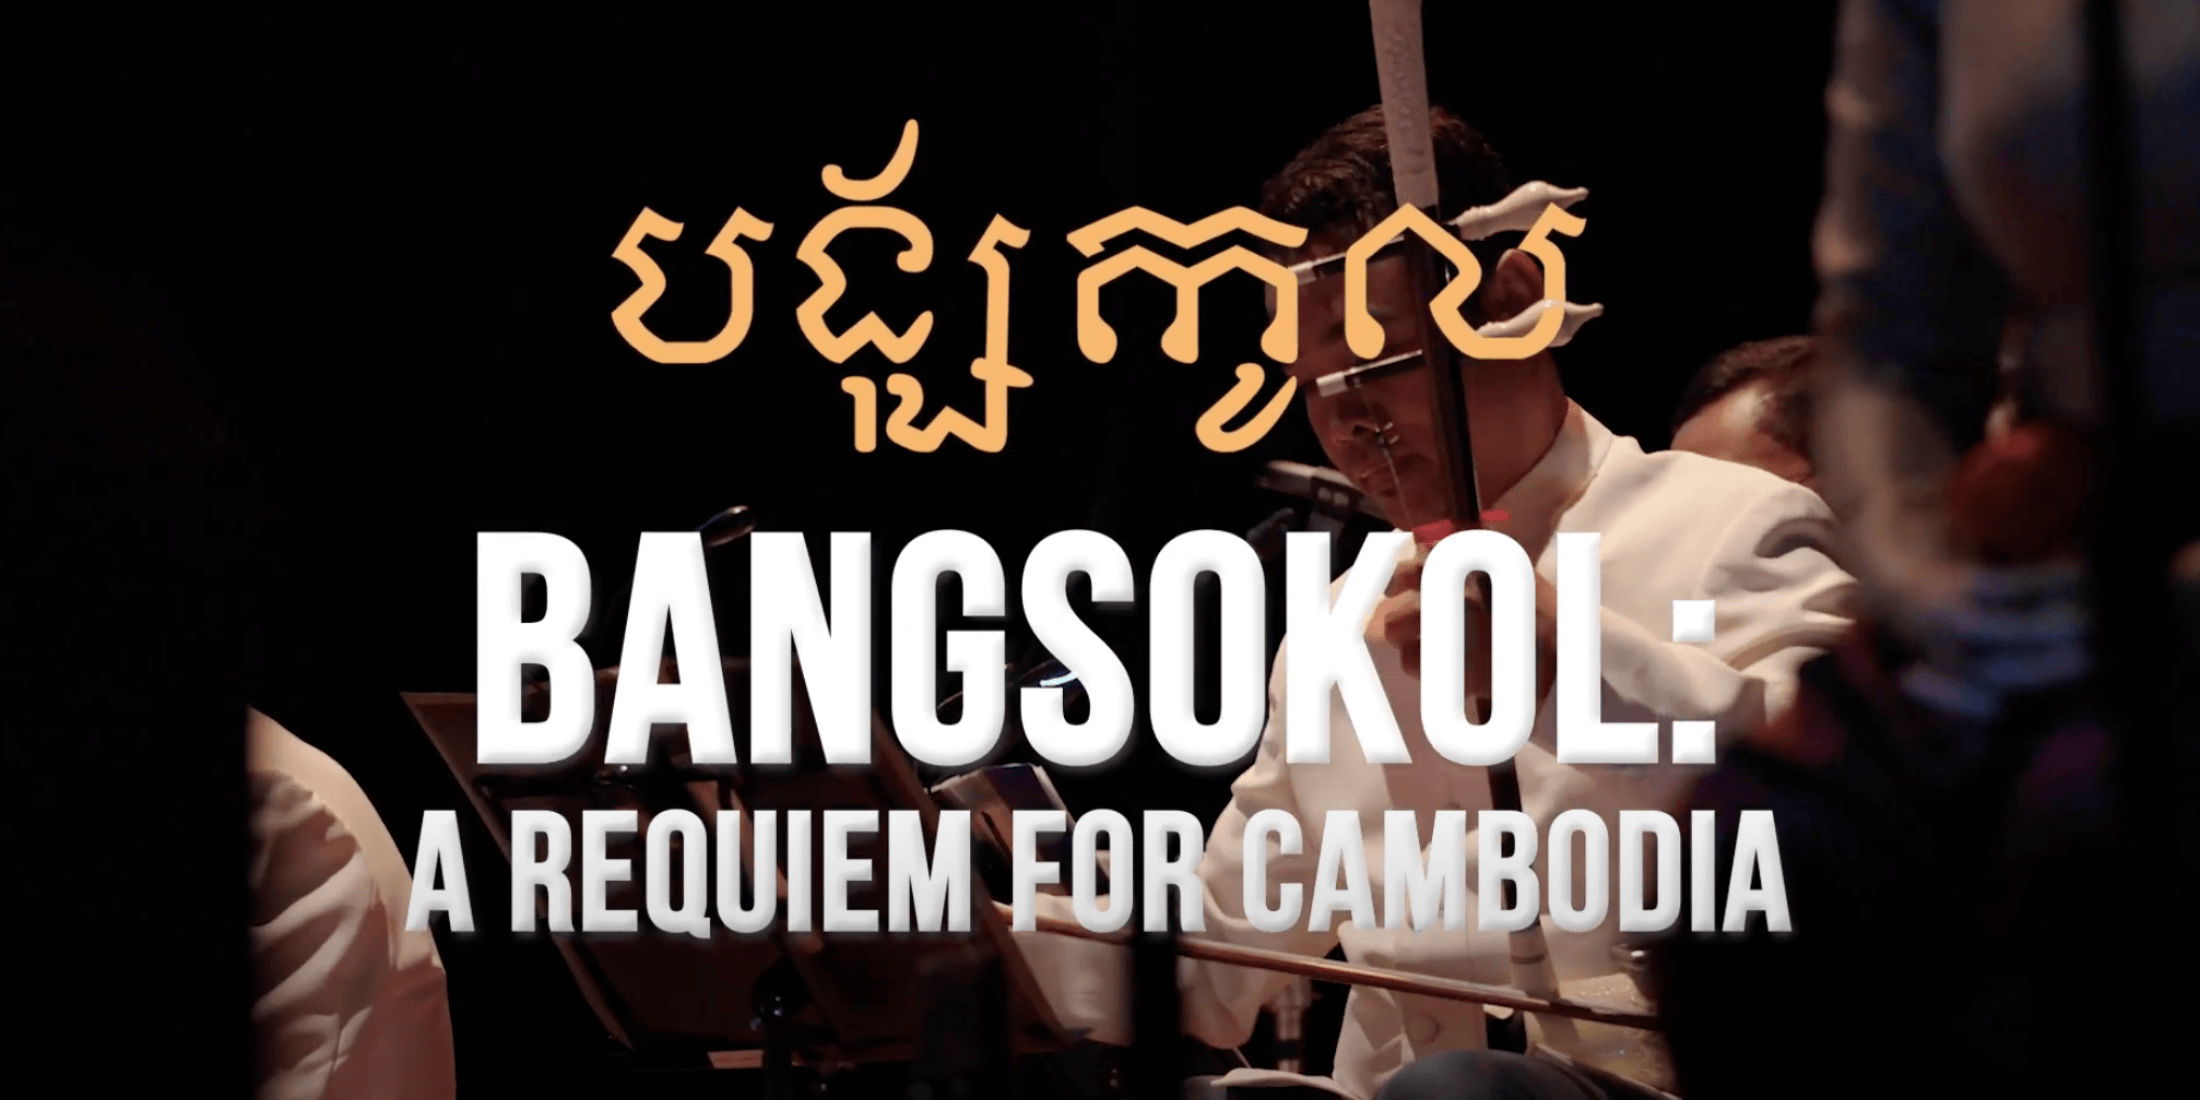 How Bangsokol: A Requiem For Cambodia Inspired Our Work in the Cause Influence Space